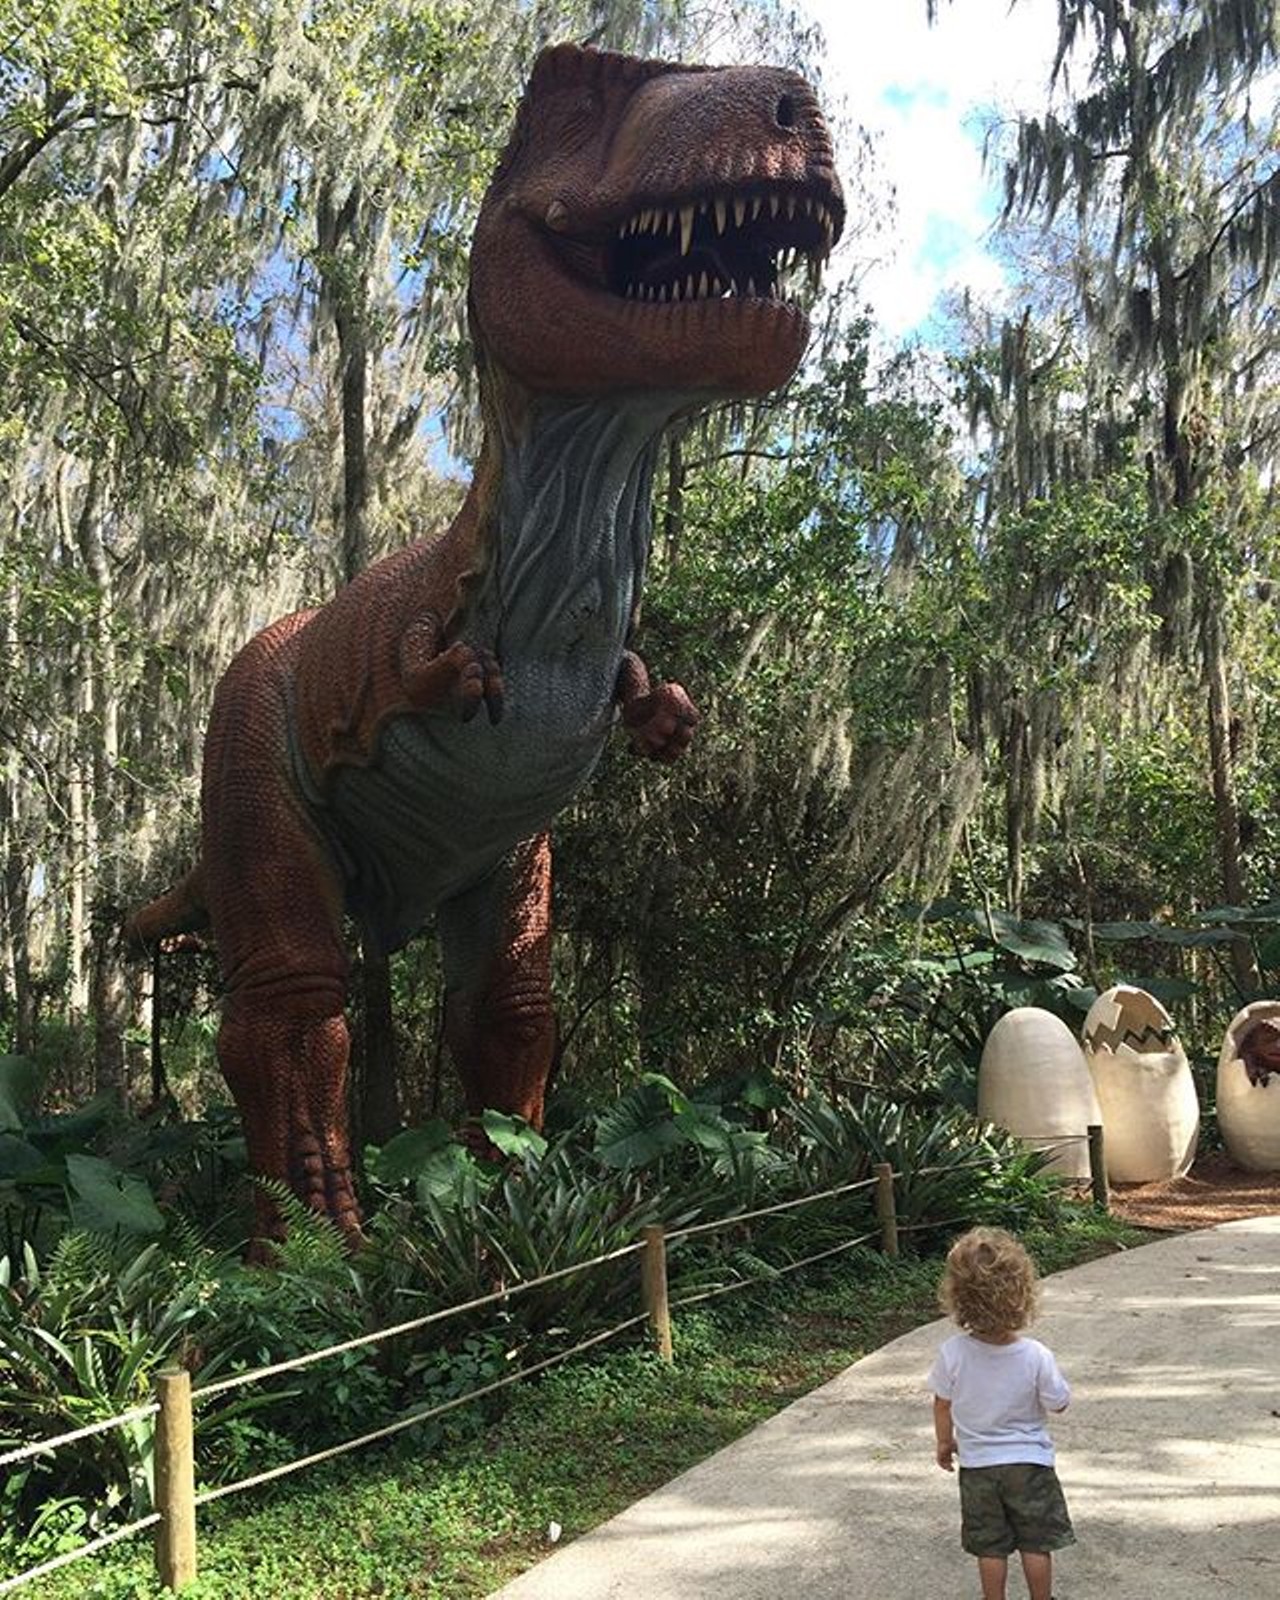 Dinosaur World
5145 Harvey Tew Road, Plant City
Road trip millions of years in the past and explore 20 acres of 200 life size dinosaurs.
Photo via darcygreco on Instagram